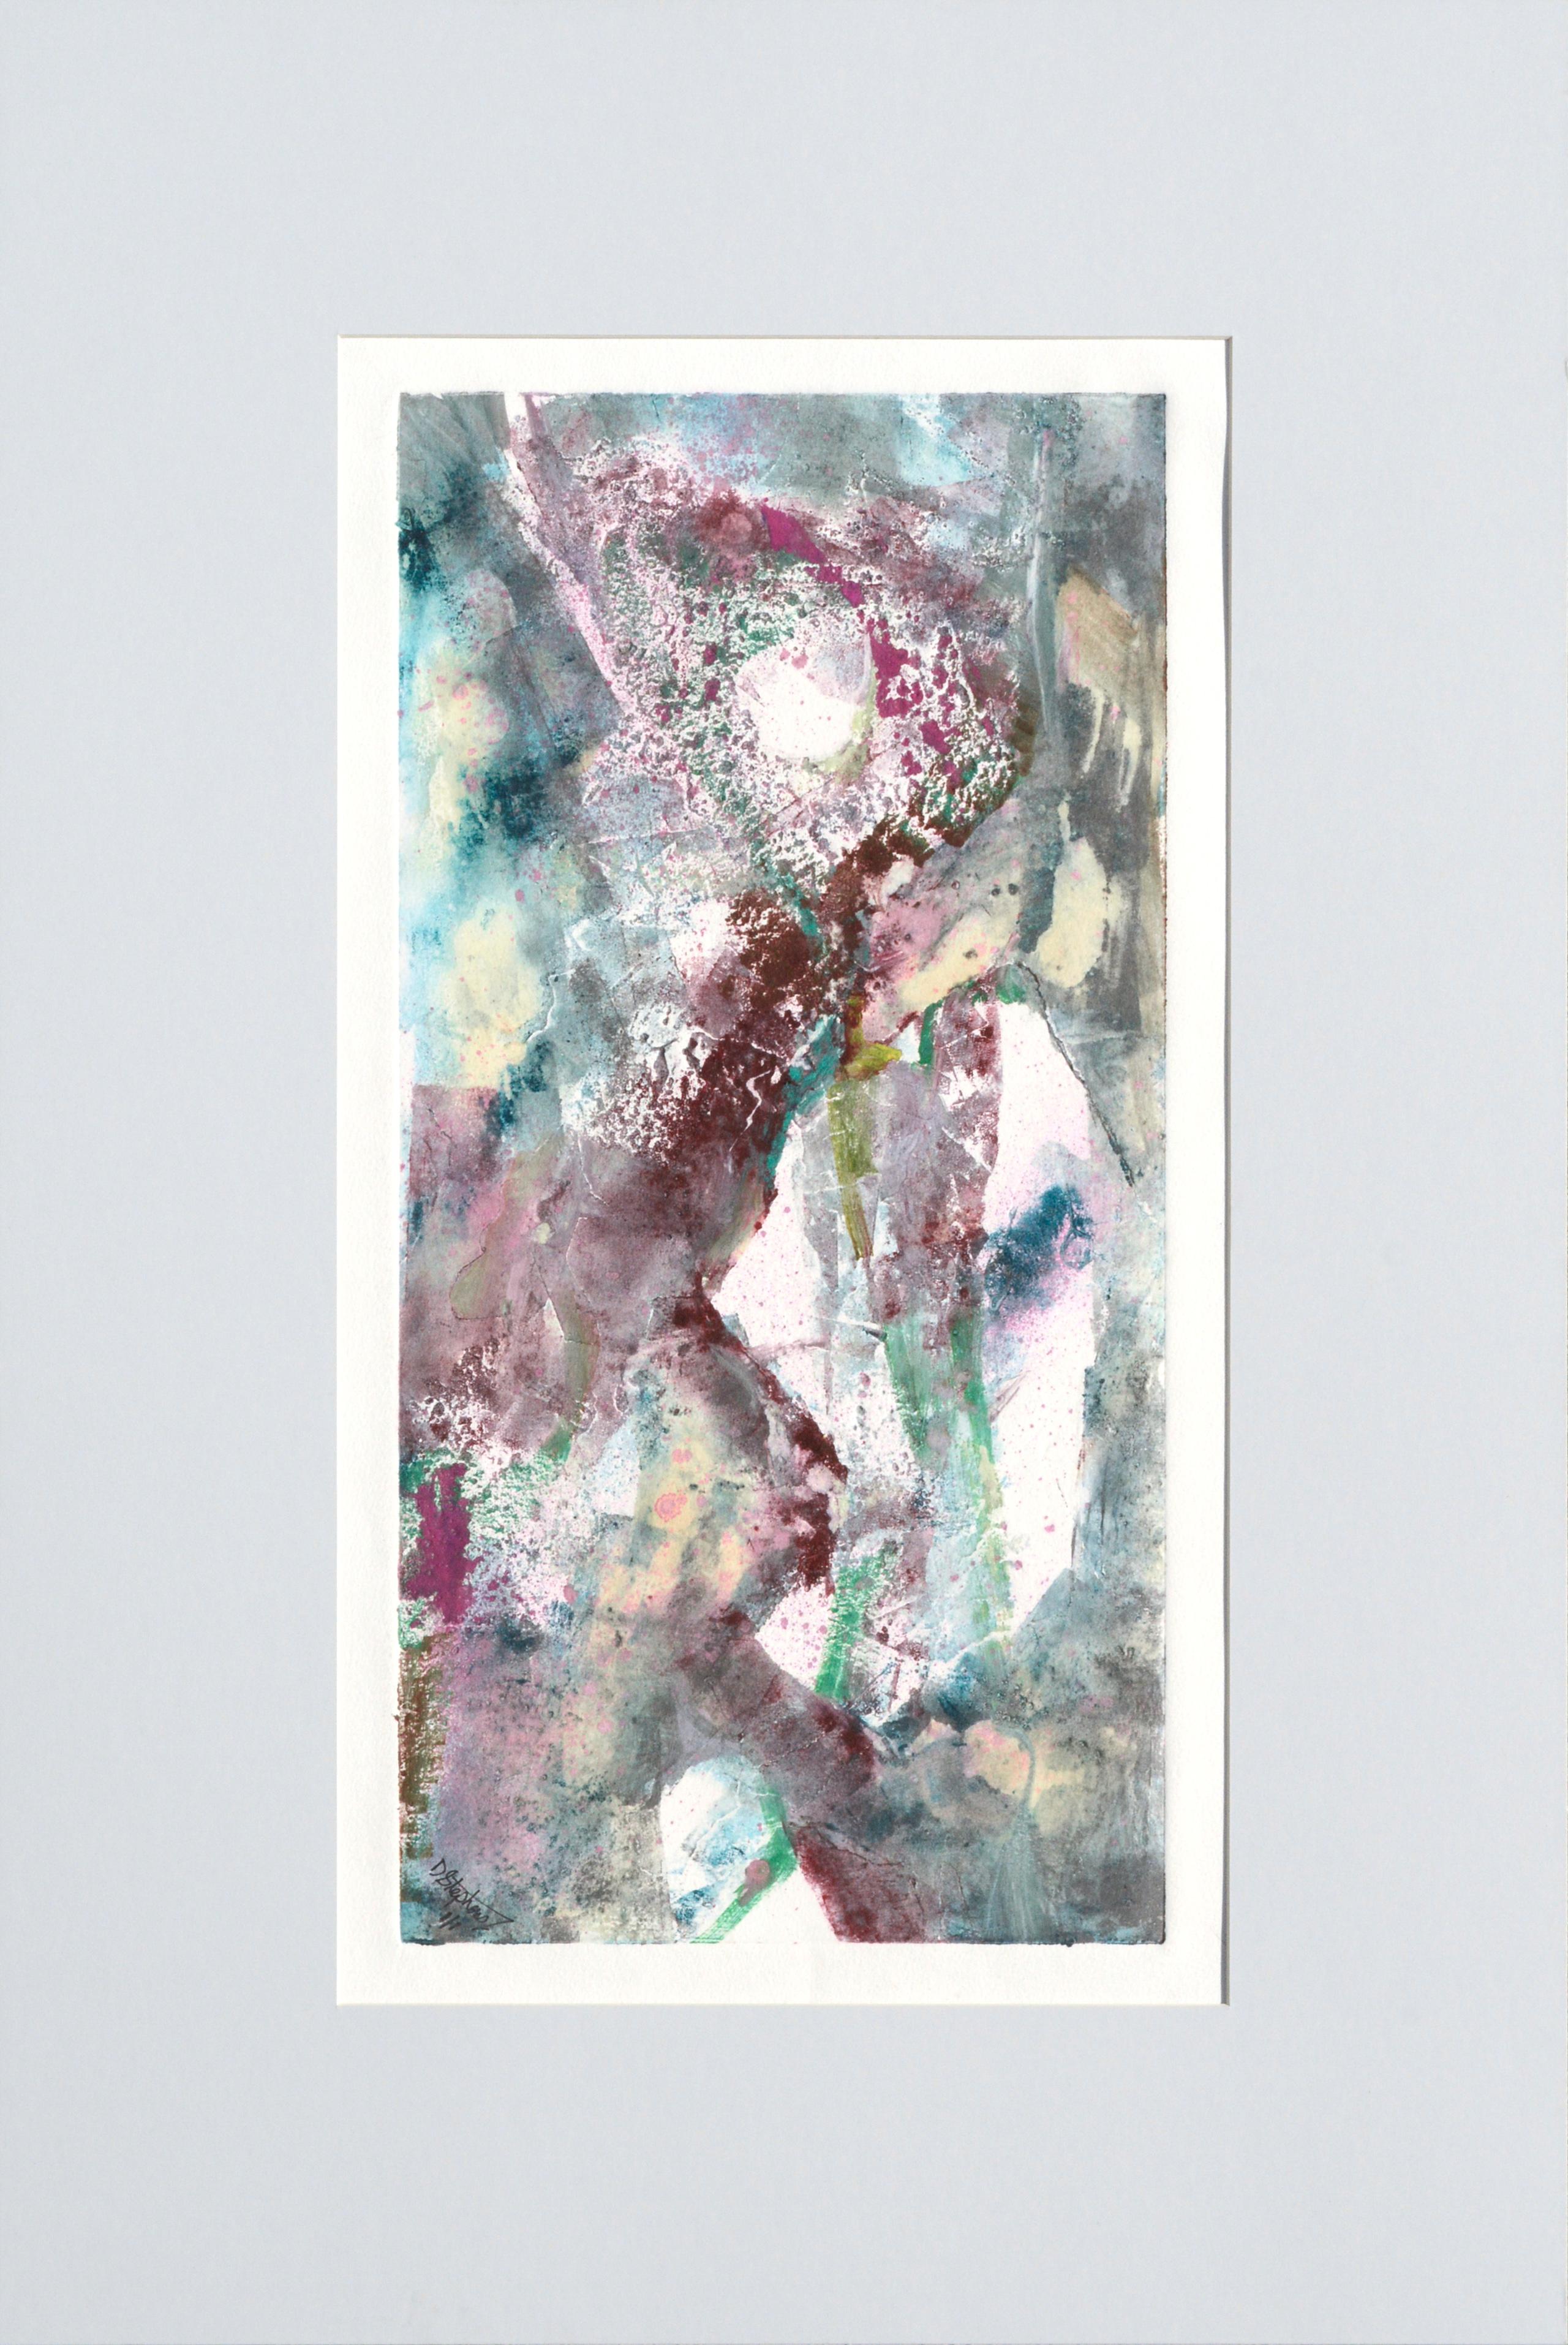 Magenta and Teal Abstracted Figurative Textured Monoprint